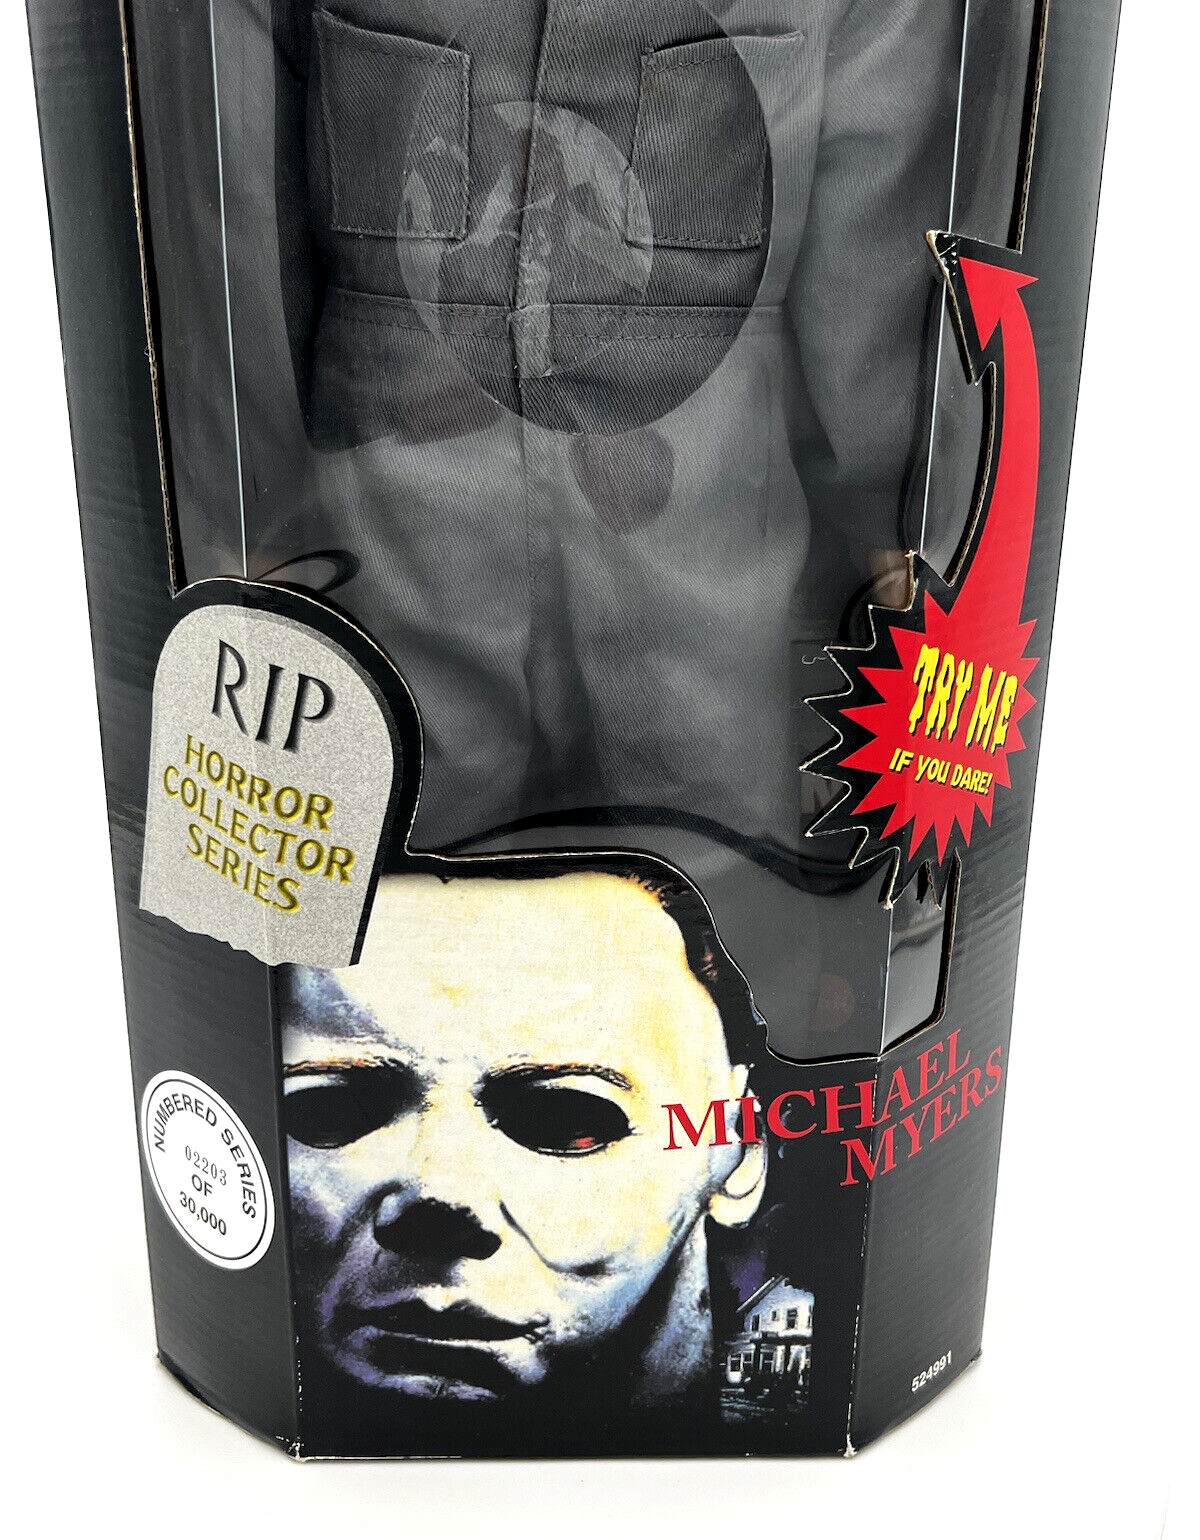 1978 Halloween Michael Myers RIP Collectible Doll  LIMITED Edition #2203/30,000